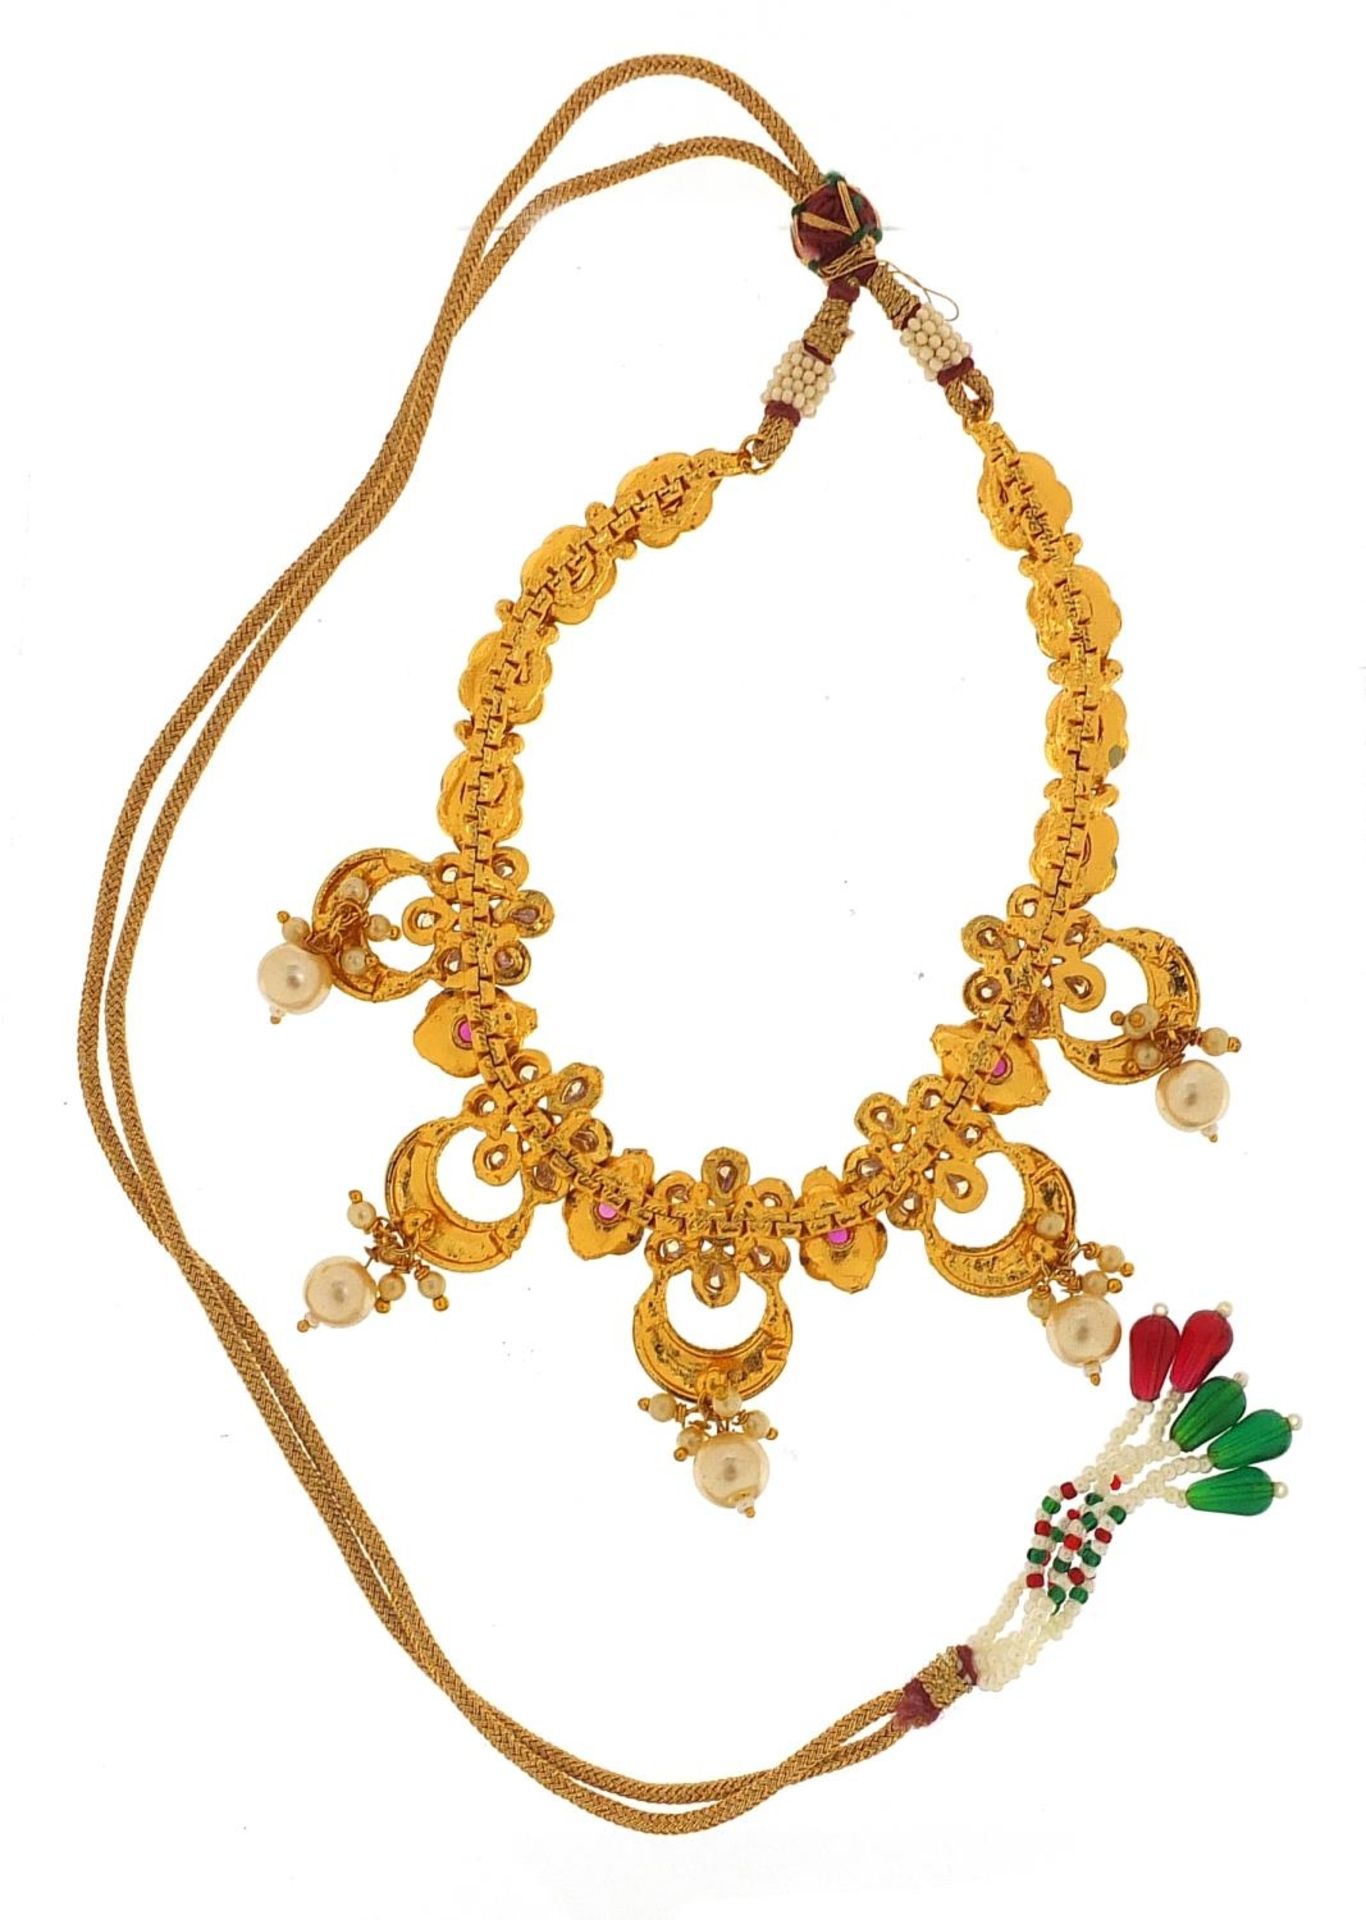 Islamic gilt metal, enamel and beadwork necklace with matching earrings, the necklace 80cm in length - Image 6 of 7